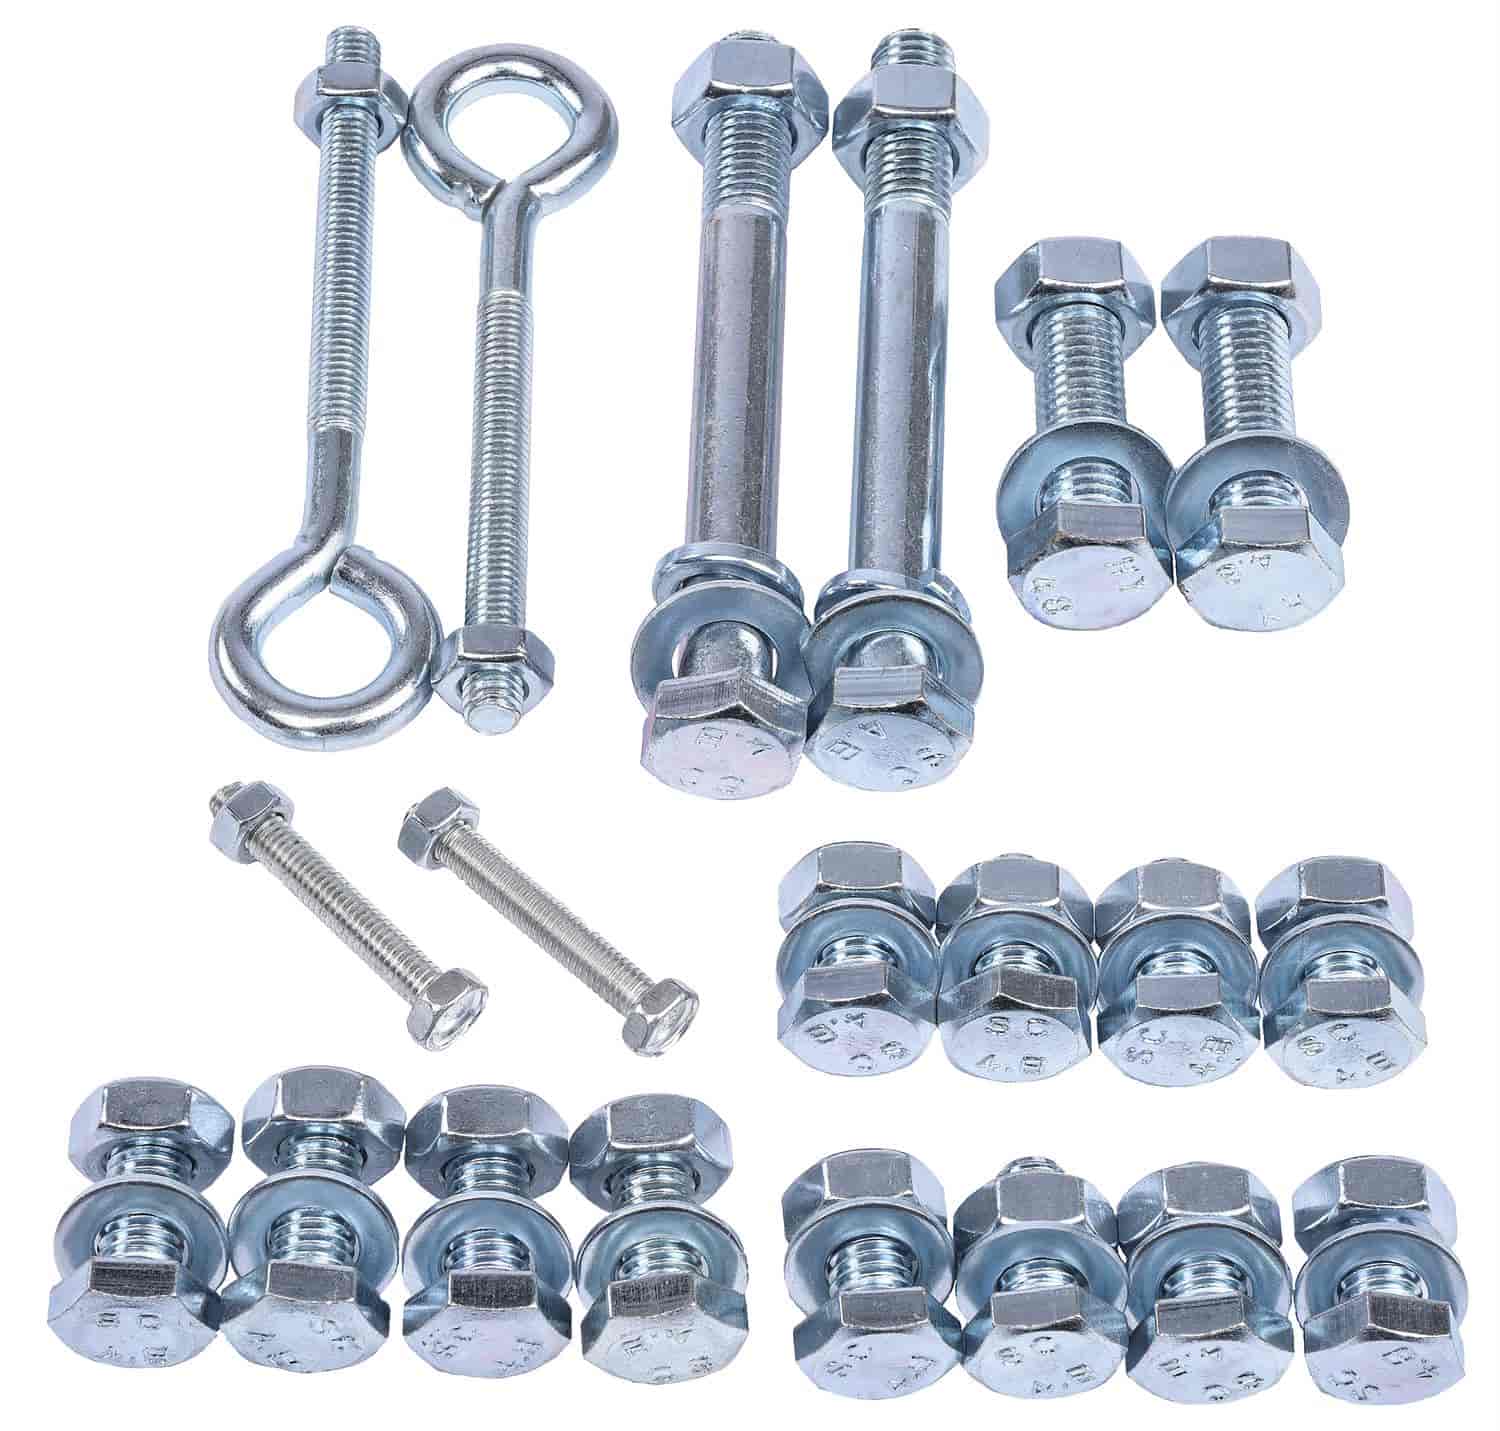 Replacement Hardware Kit for 6-Ton Hydraulic Shop Press 555-81635